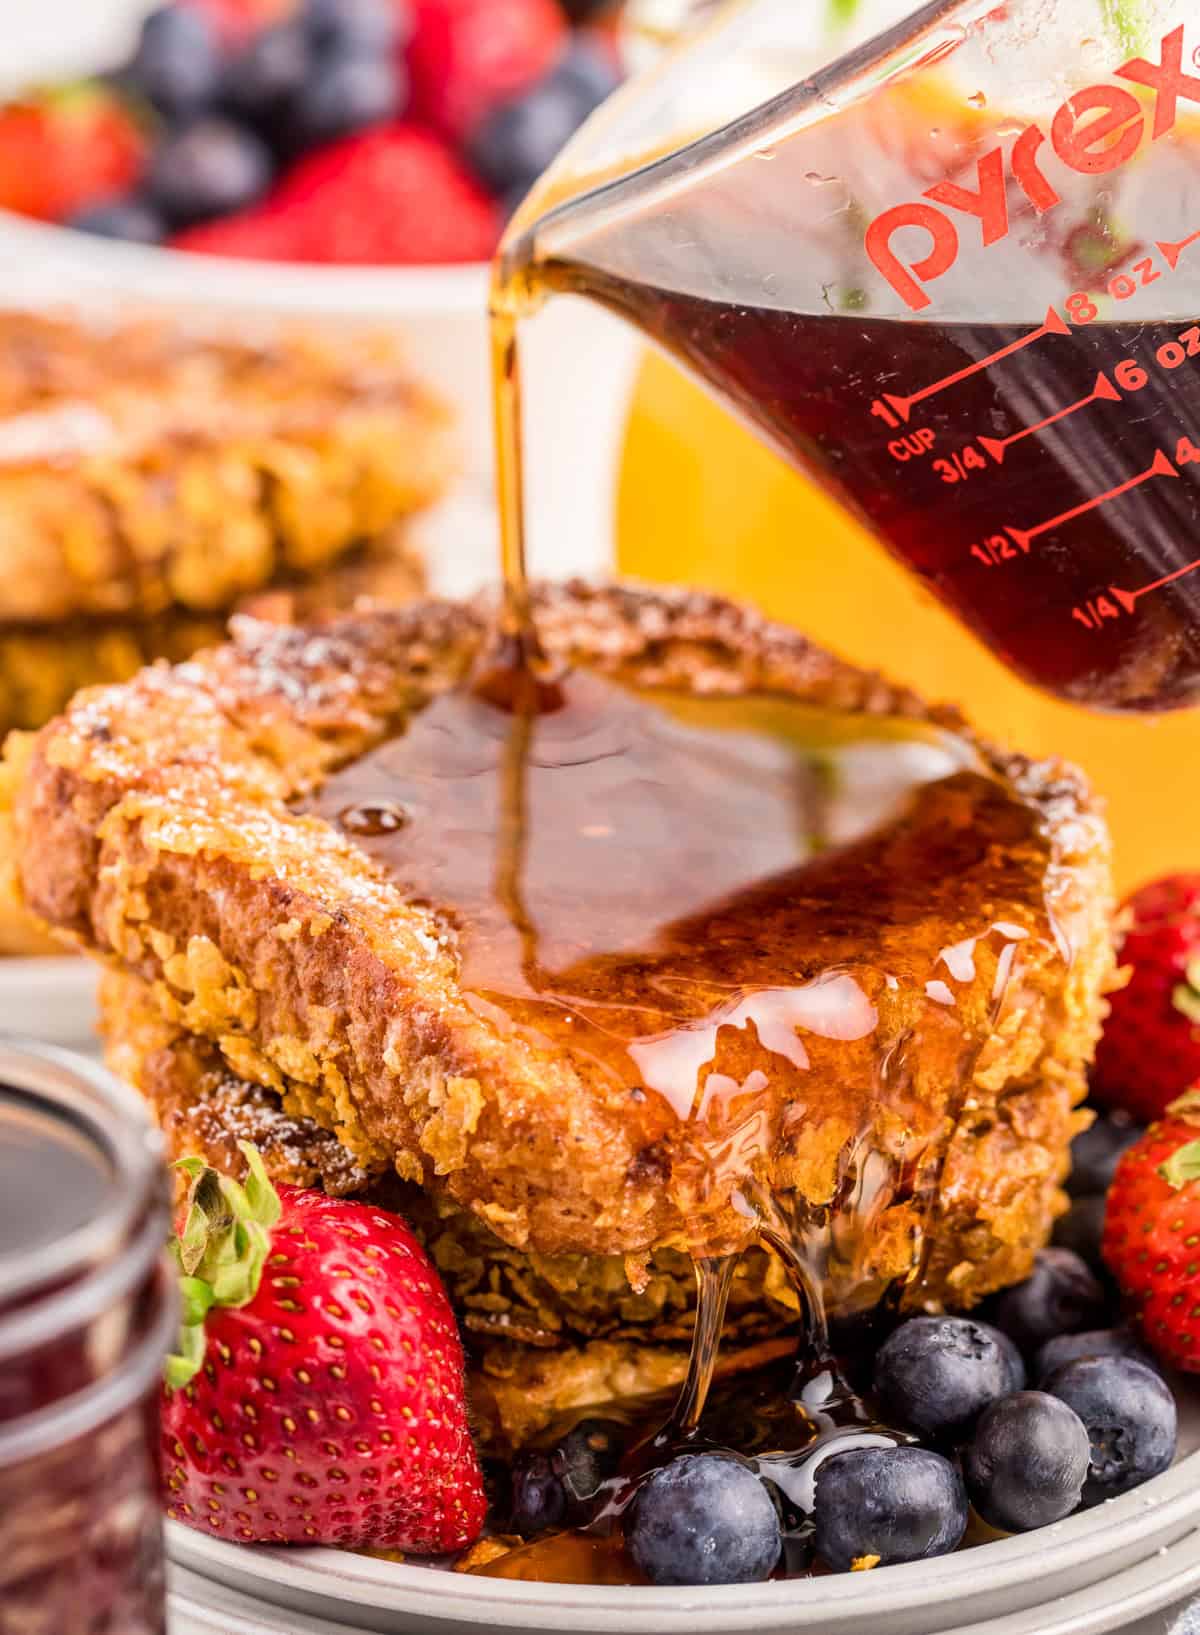 Syrup being poured over stacked french toast on plate with fruit.